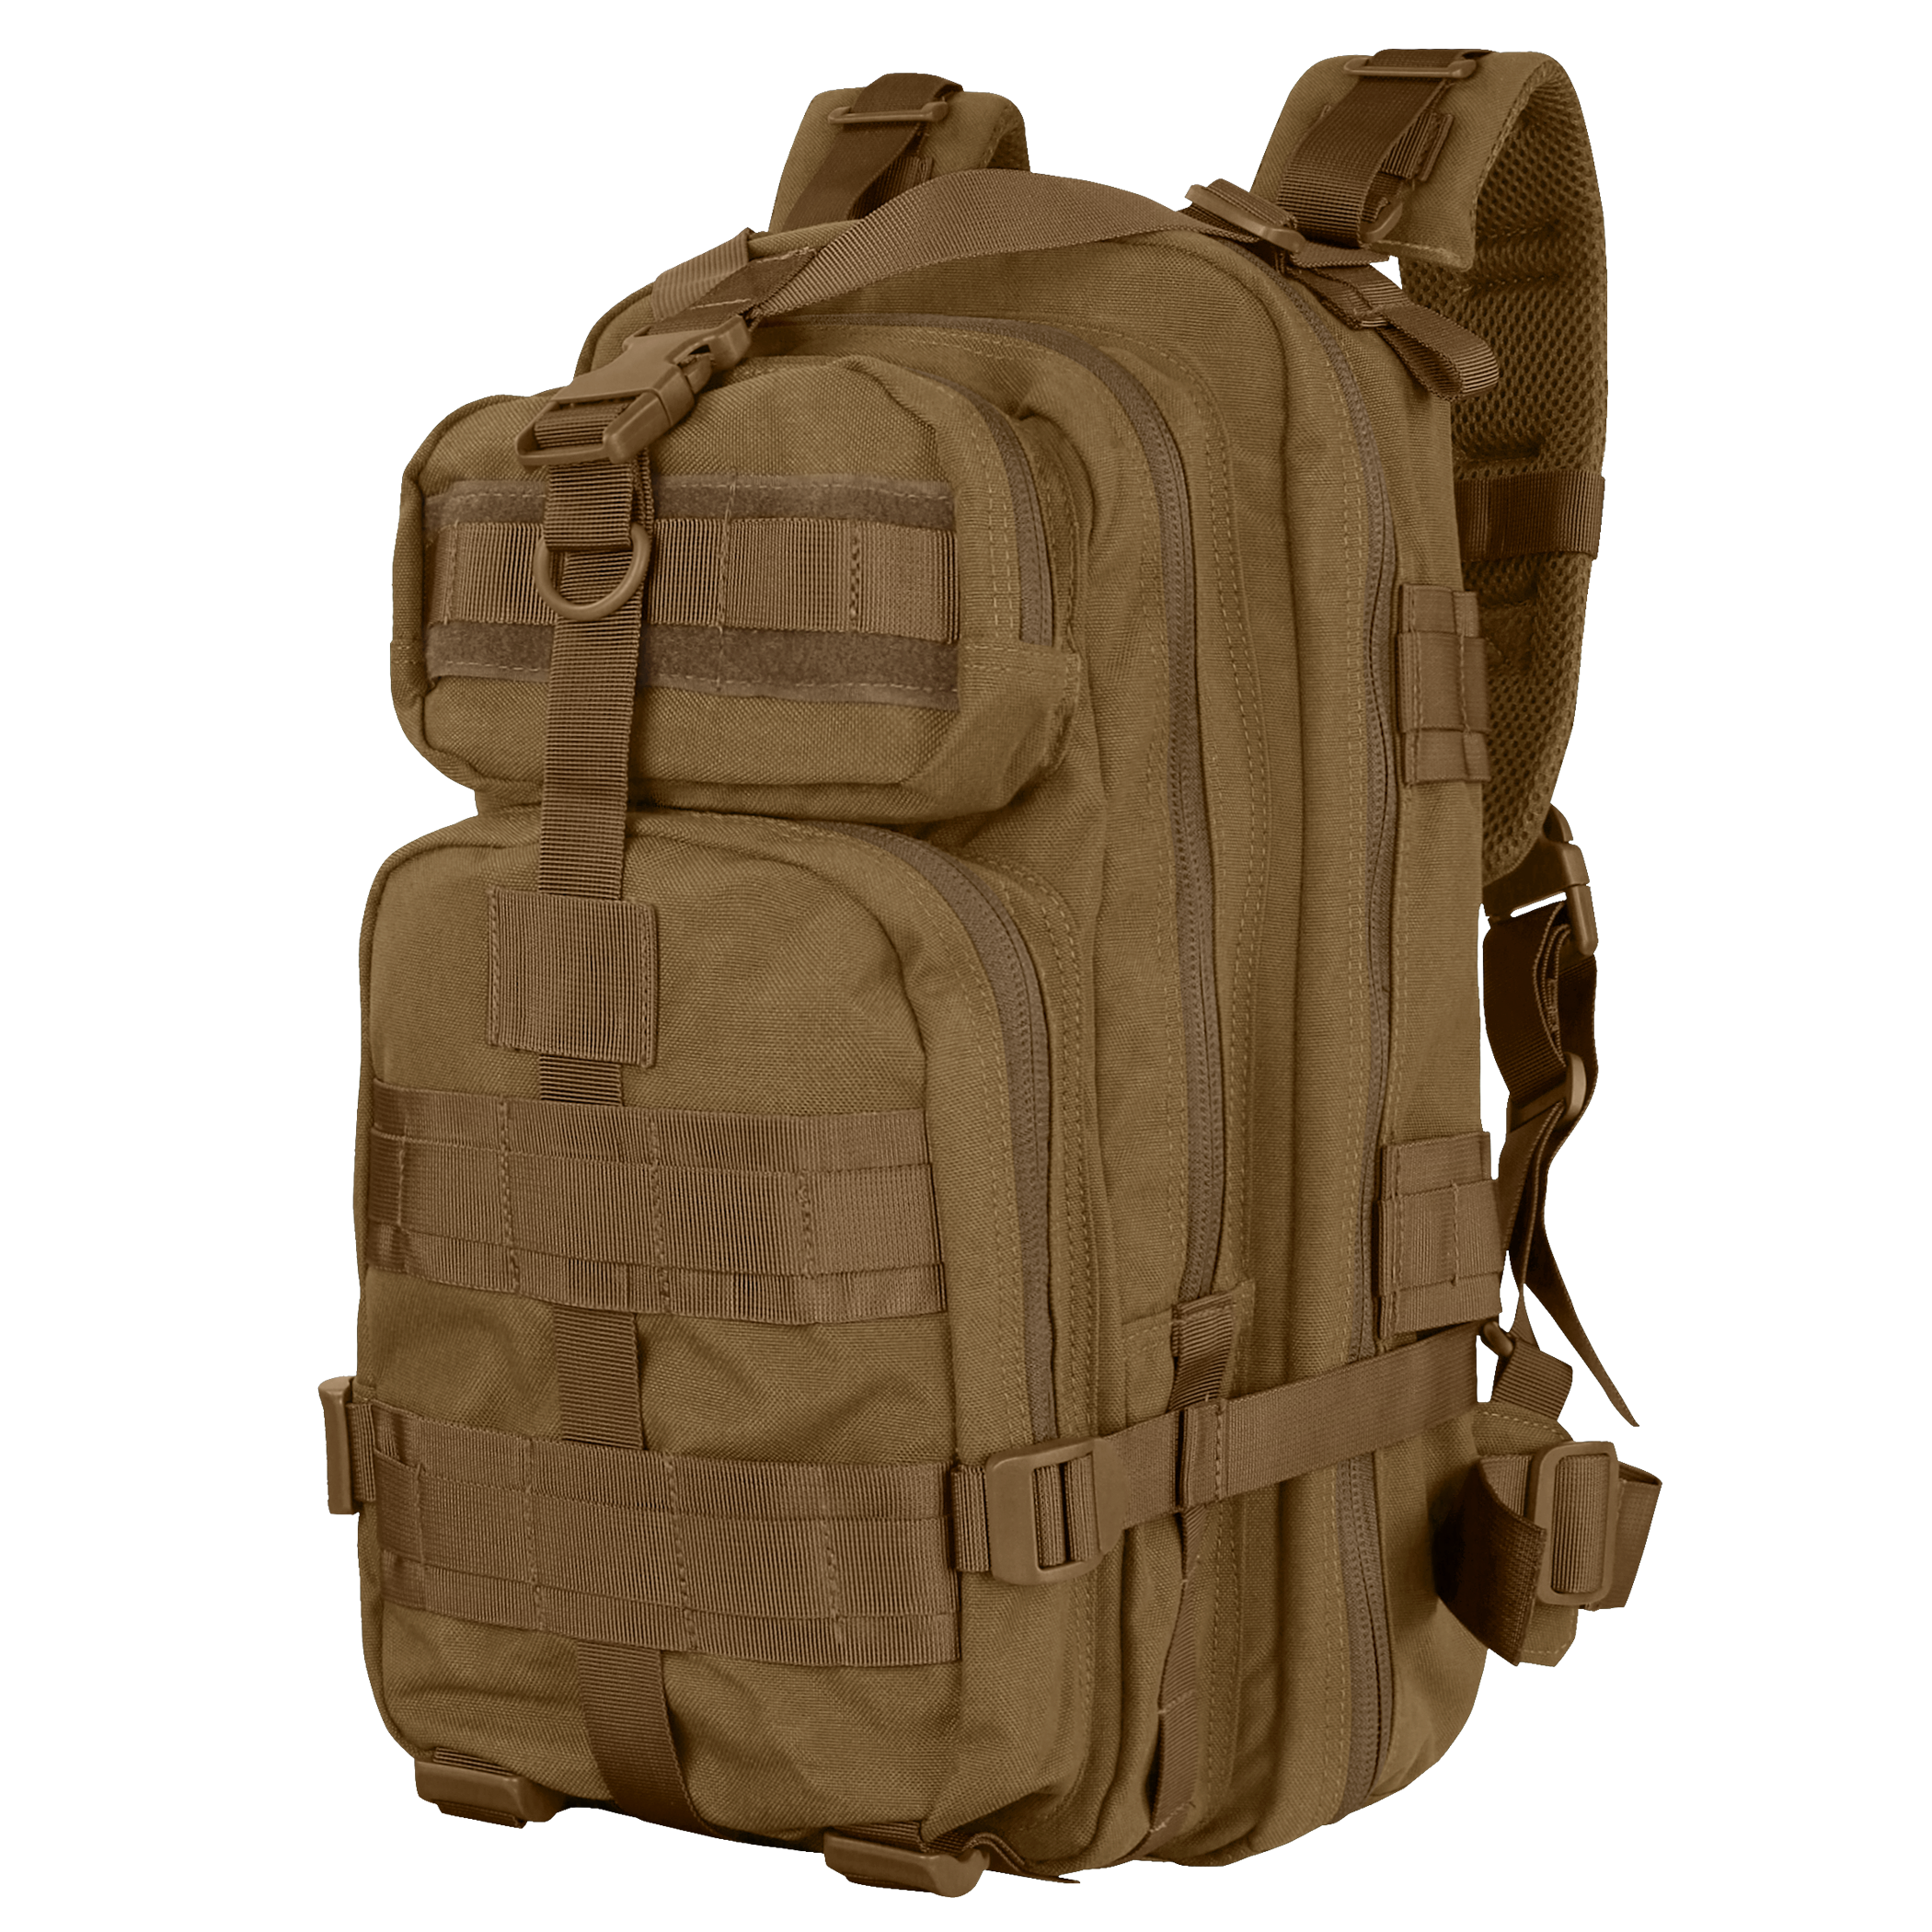 Compact Assault Backpack 24L in Coyote Brown